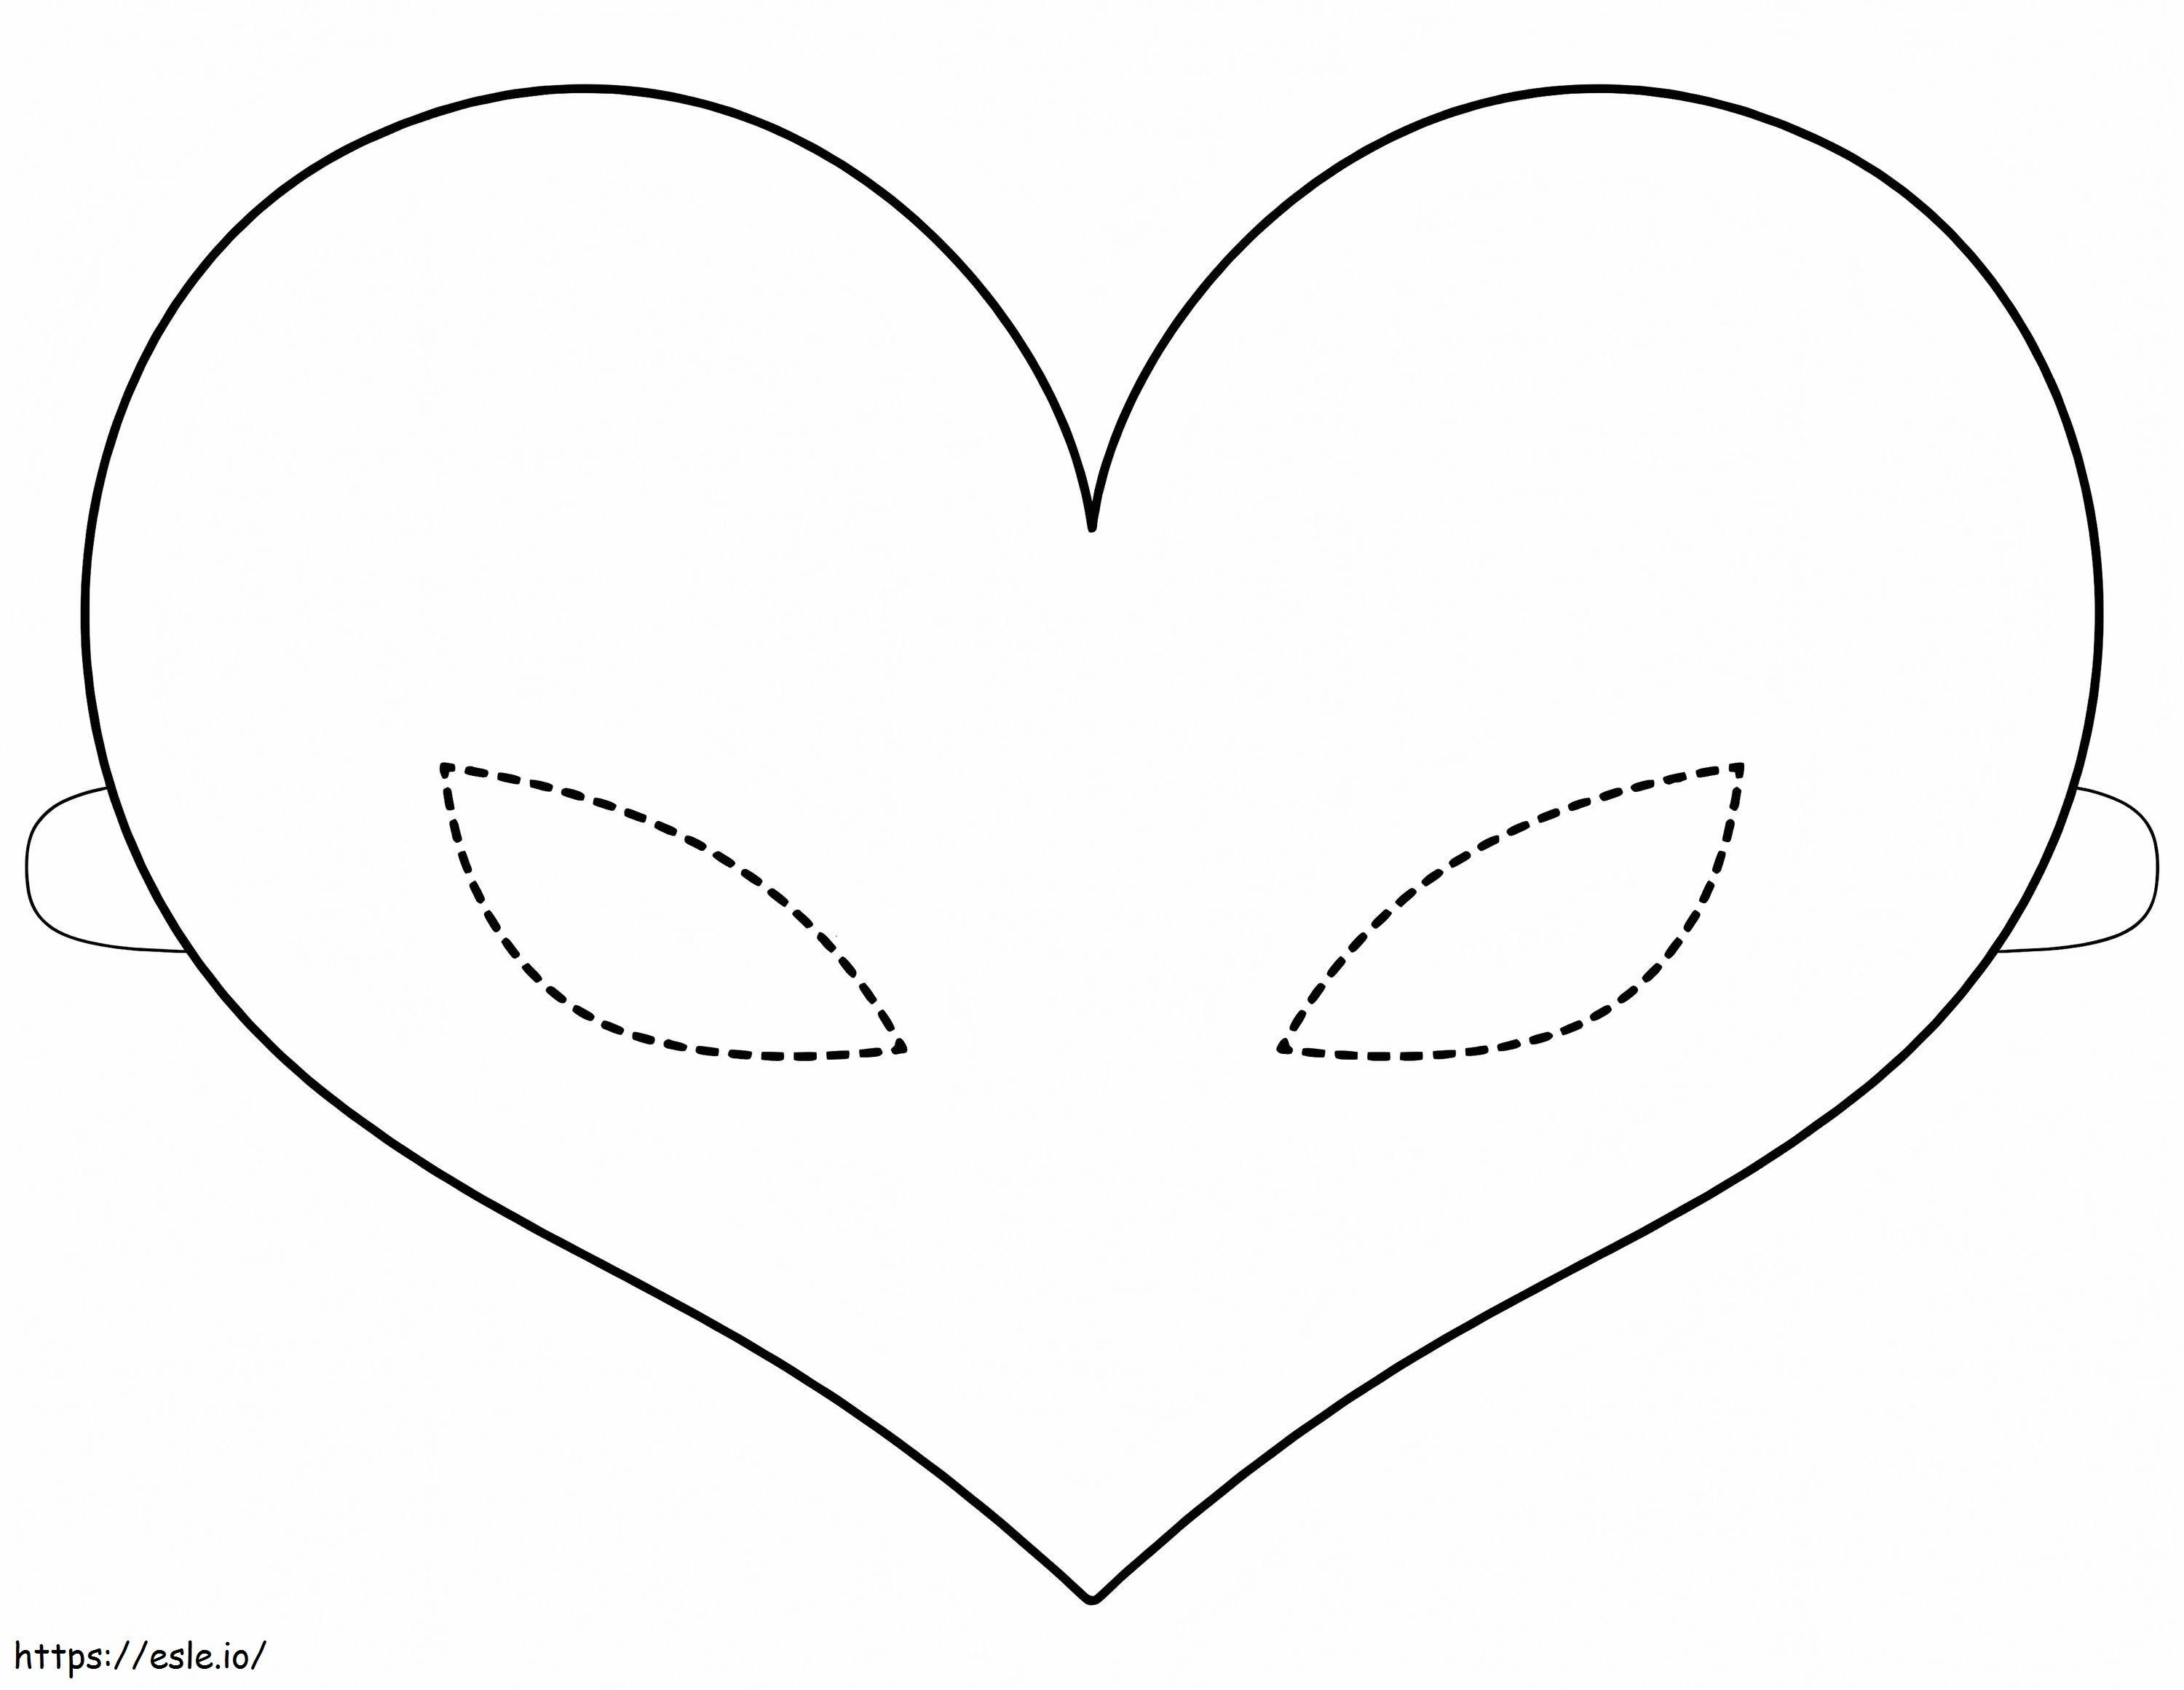 Heart Mask Mardi Gras coloring page